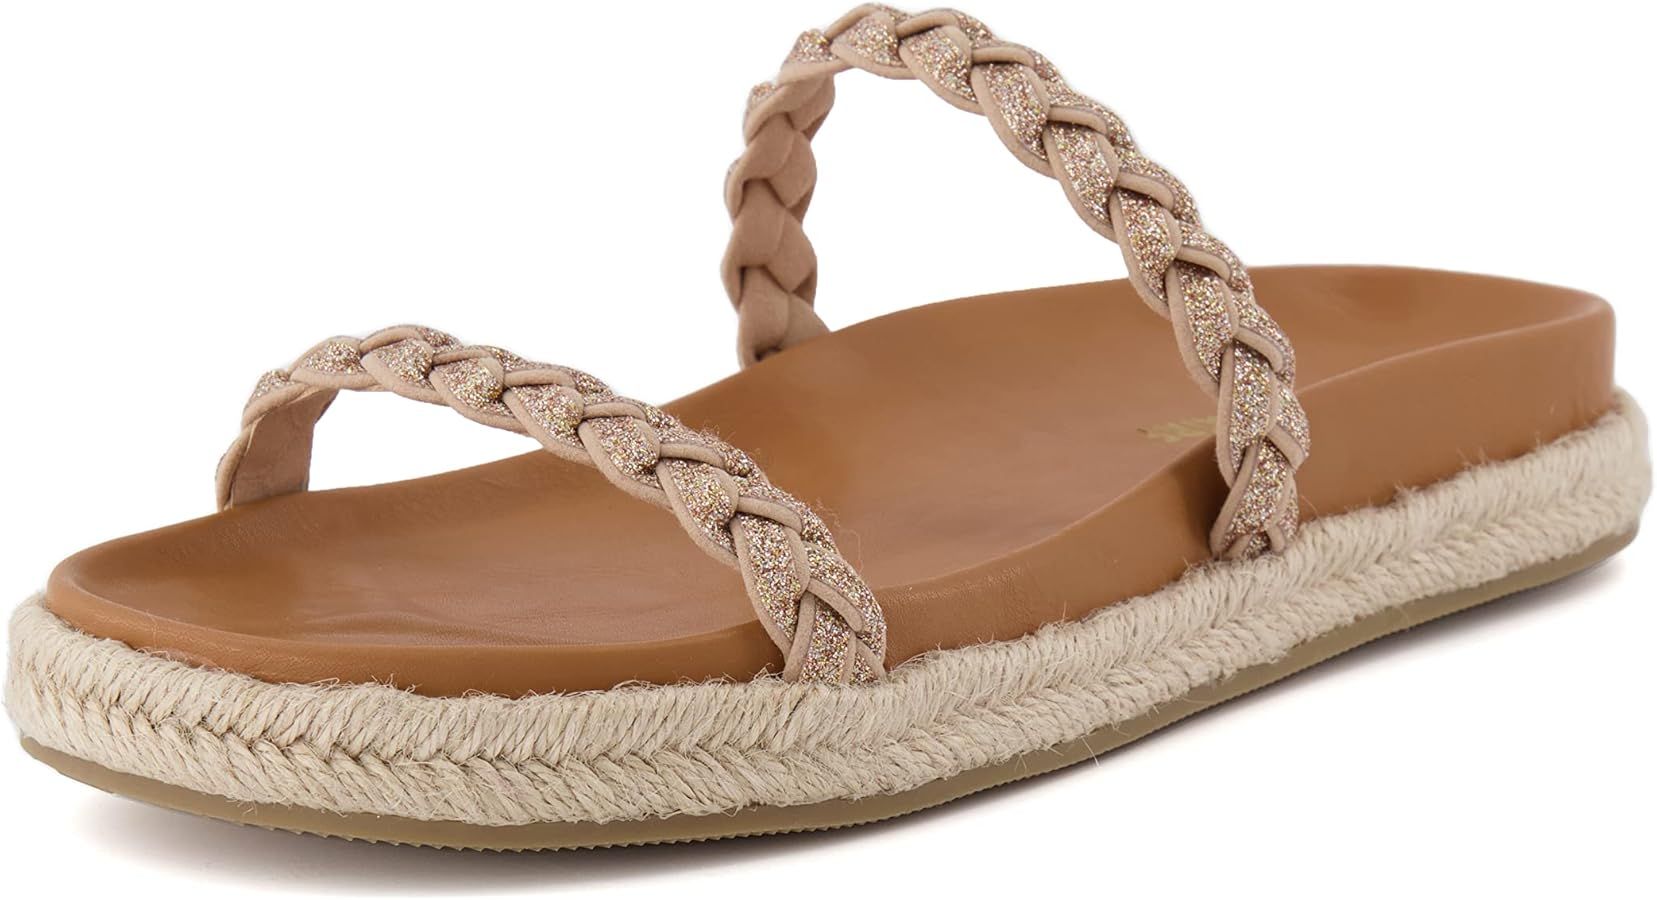 CUSHIONAIRE Women's Nutmeg Espadrille footbed sandal with +Comfort, Wide Widths Available | Amazon (US)